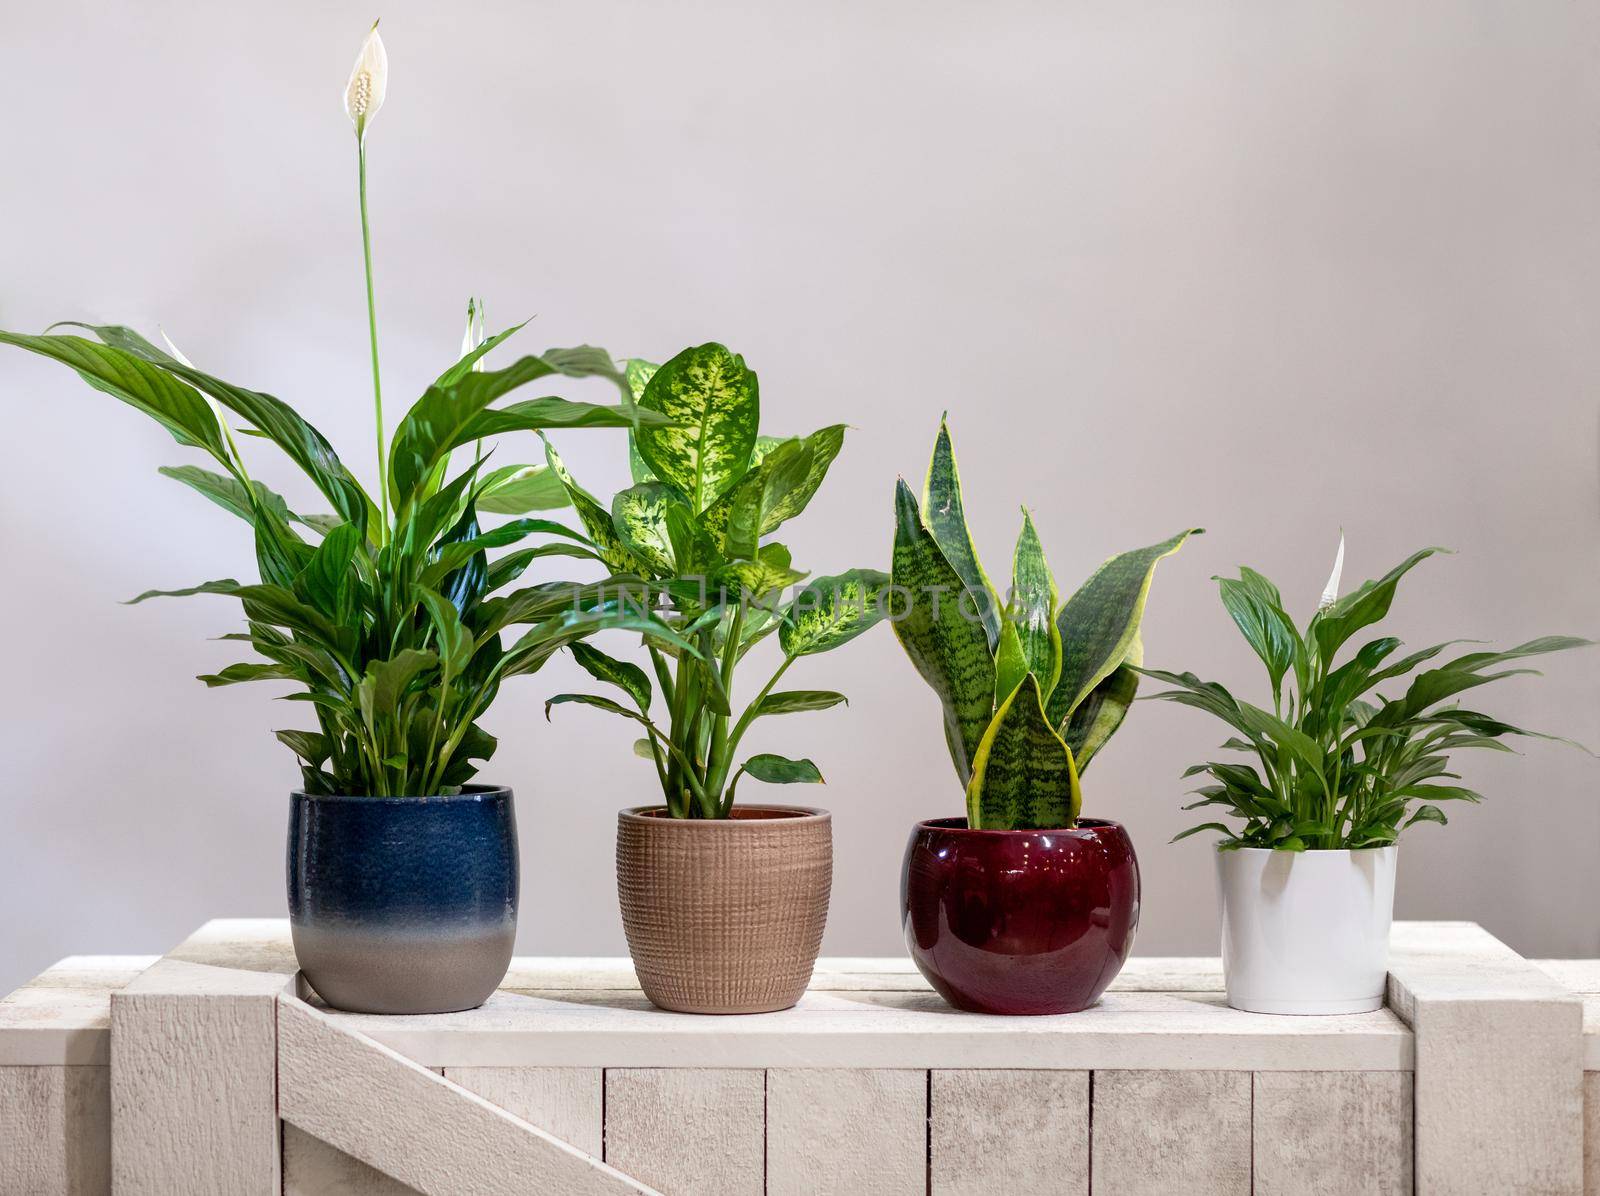 Peace Lily, Dieffenbachia Dumb canes, Mother-in-law's Tongue Viper's bowstring hemp snake plant